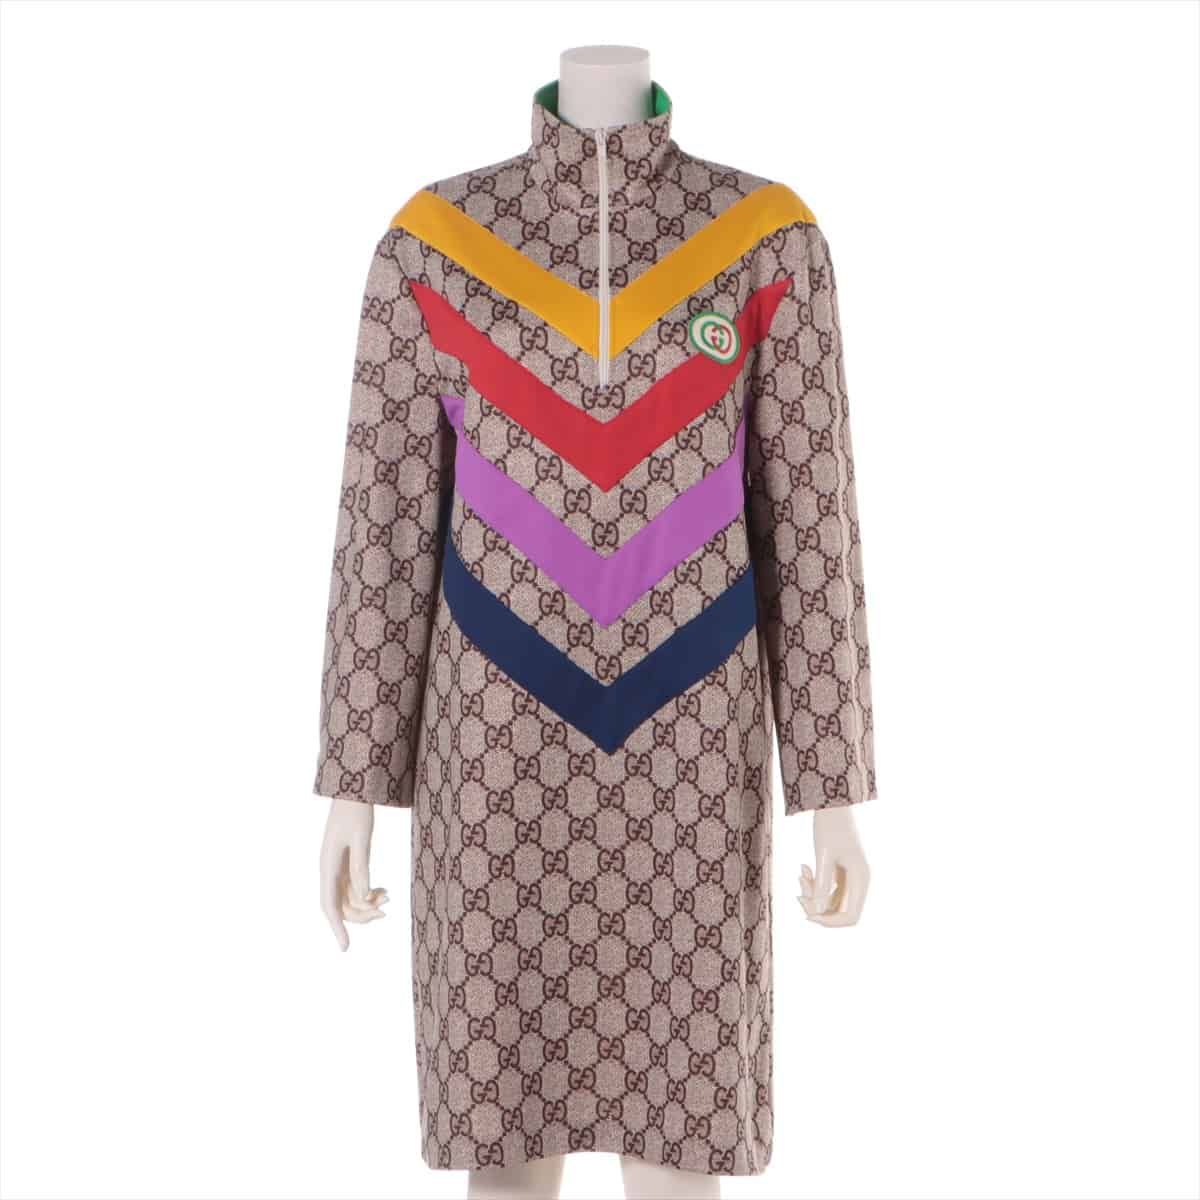 Gucci GG 19-year Cotton & Polyester Dress S Ladies' Brown  580583 rainbow print